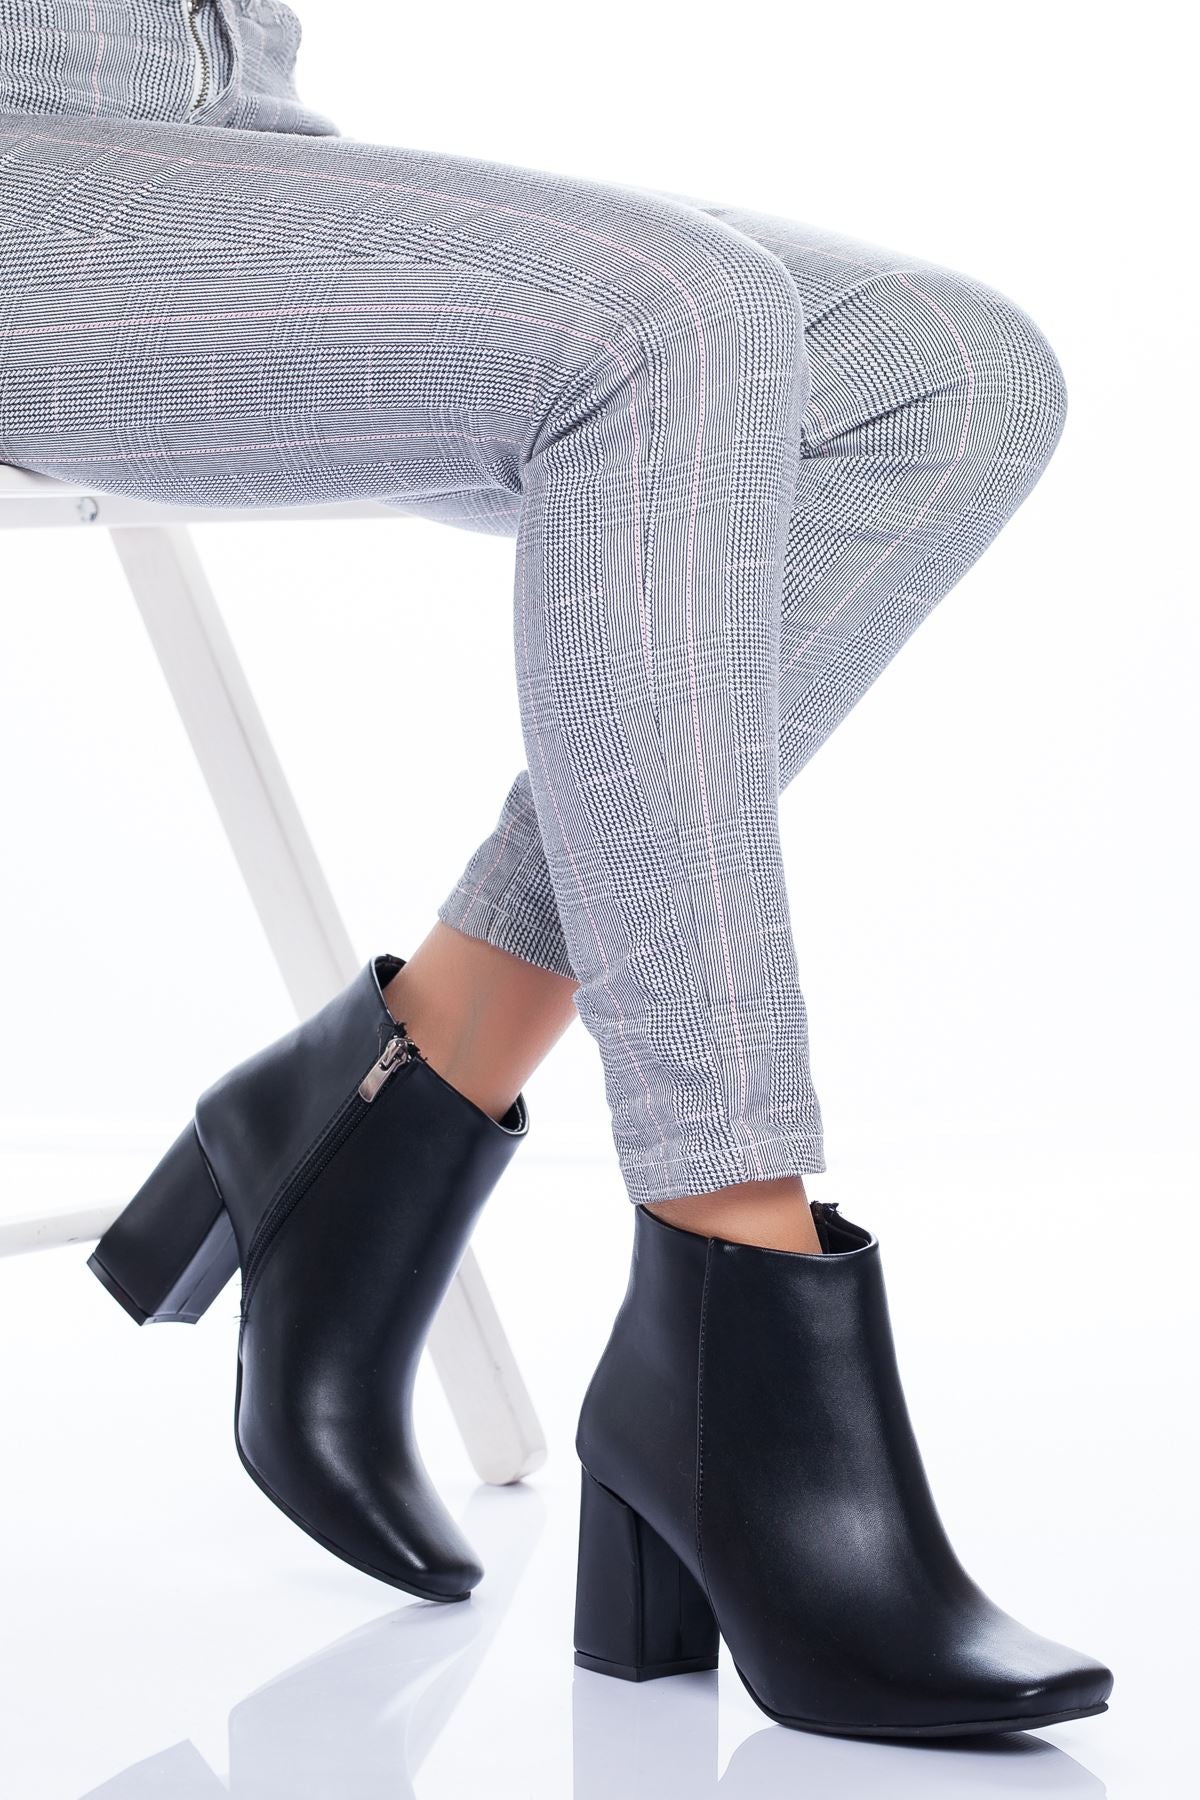 Image of Women's Black Leather Heeled Boots